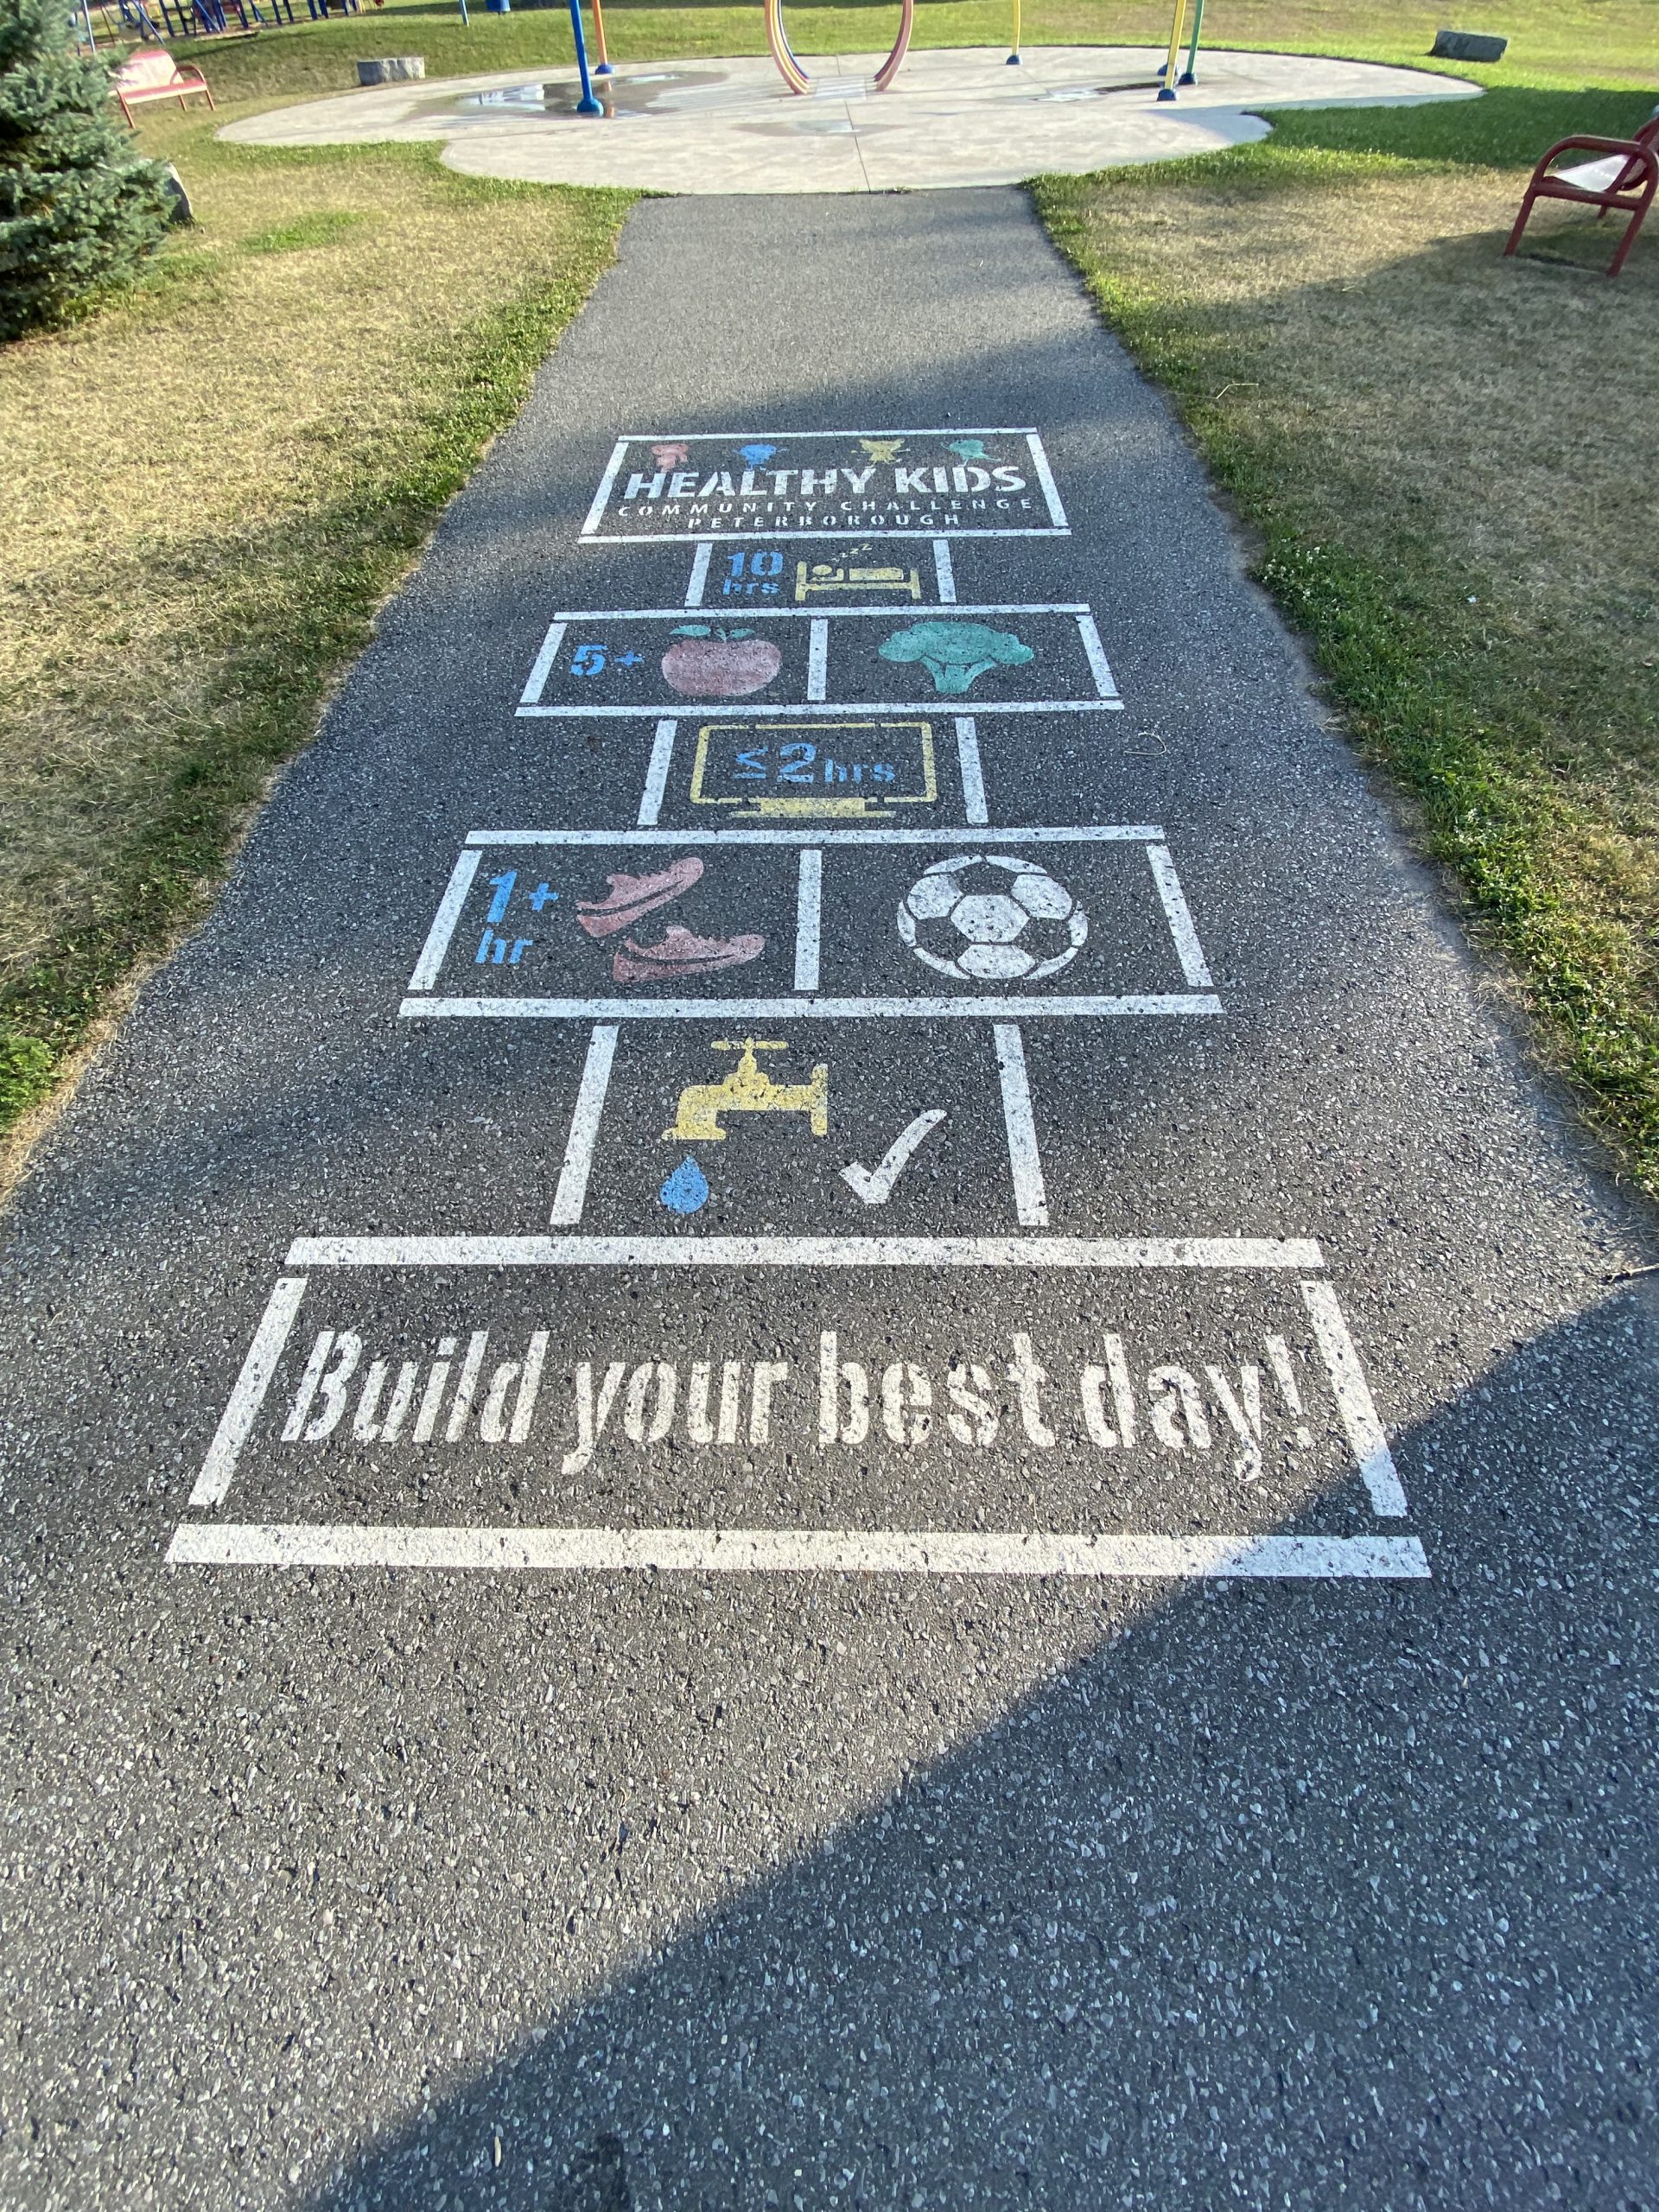 A picture of Healthy Kids being active at the park. The picture is on the cement at the entrance to the park in Norwood at the Norwood Community Centre to challenge kids to get Healthy